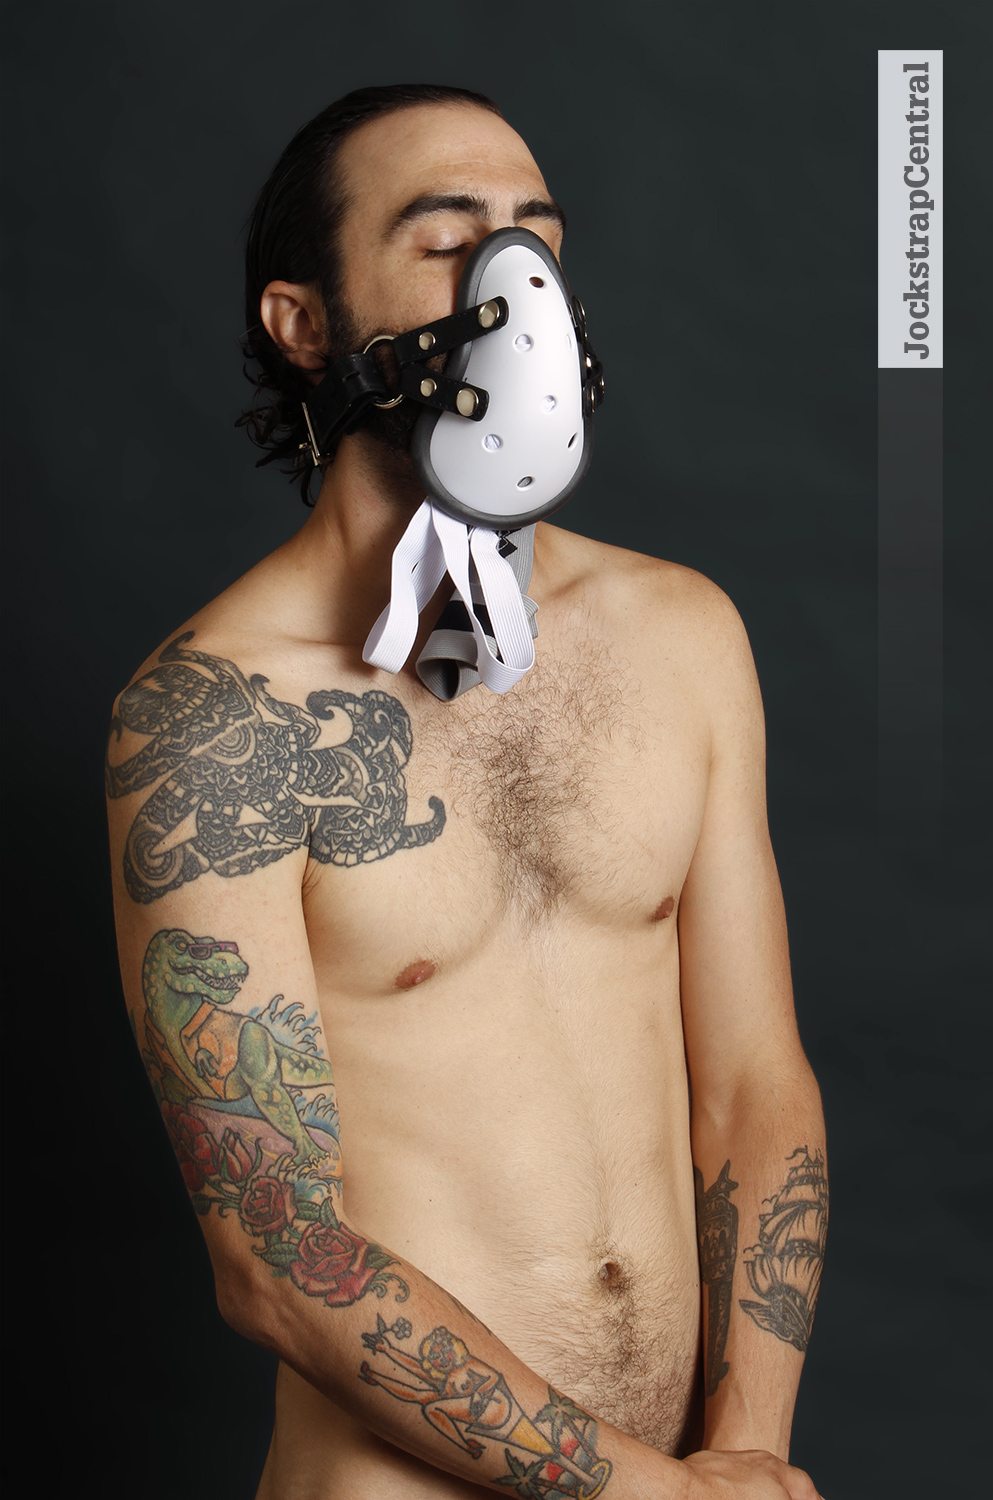 andrew-athletic-cup-musk-muzzle-3.jpg